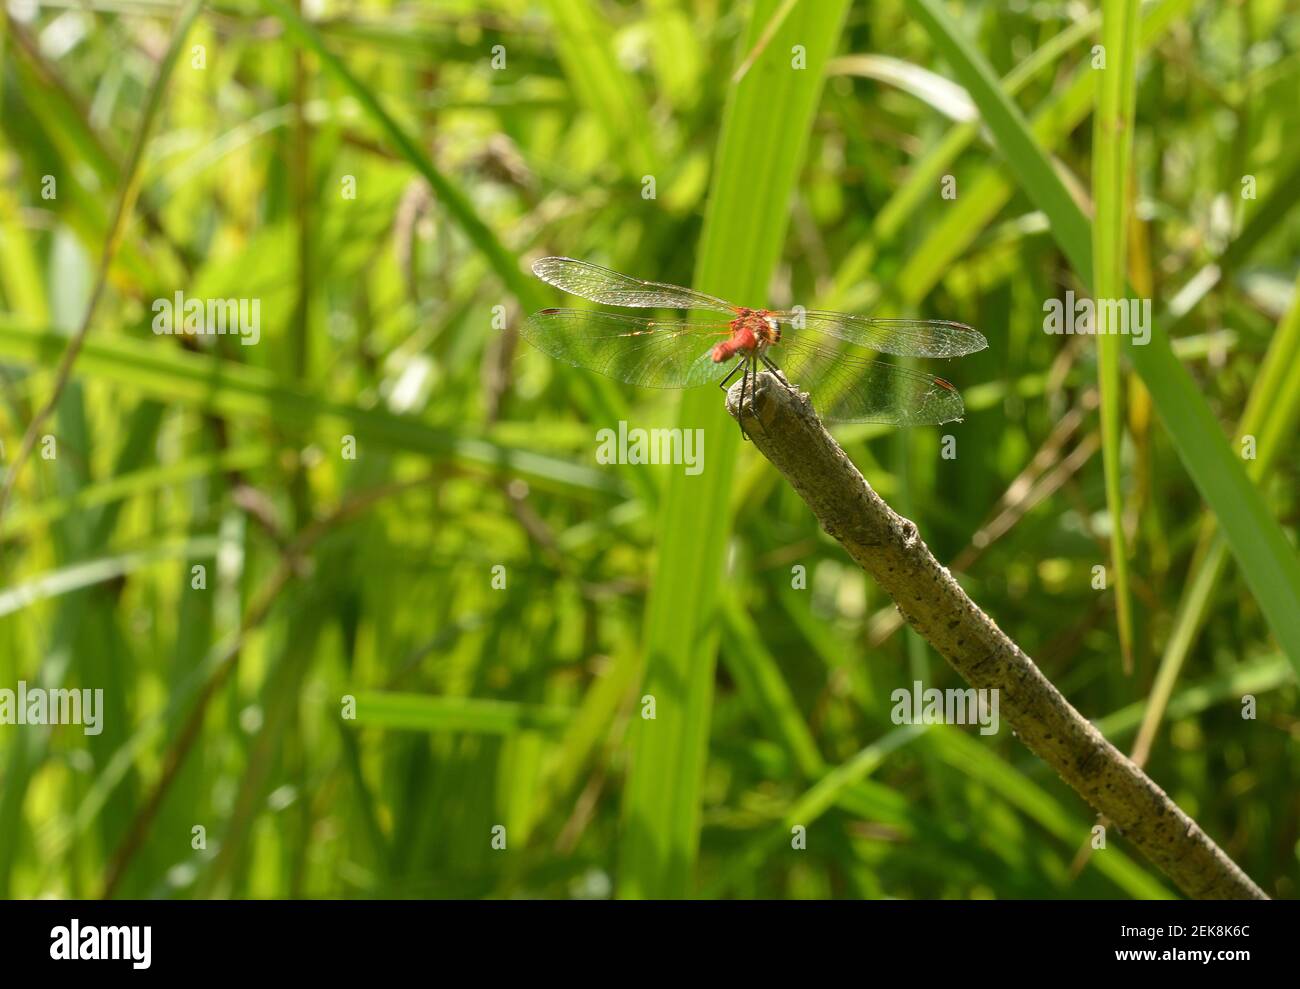 A red dragonfly with filigran wings in the nature Stock Photo